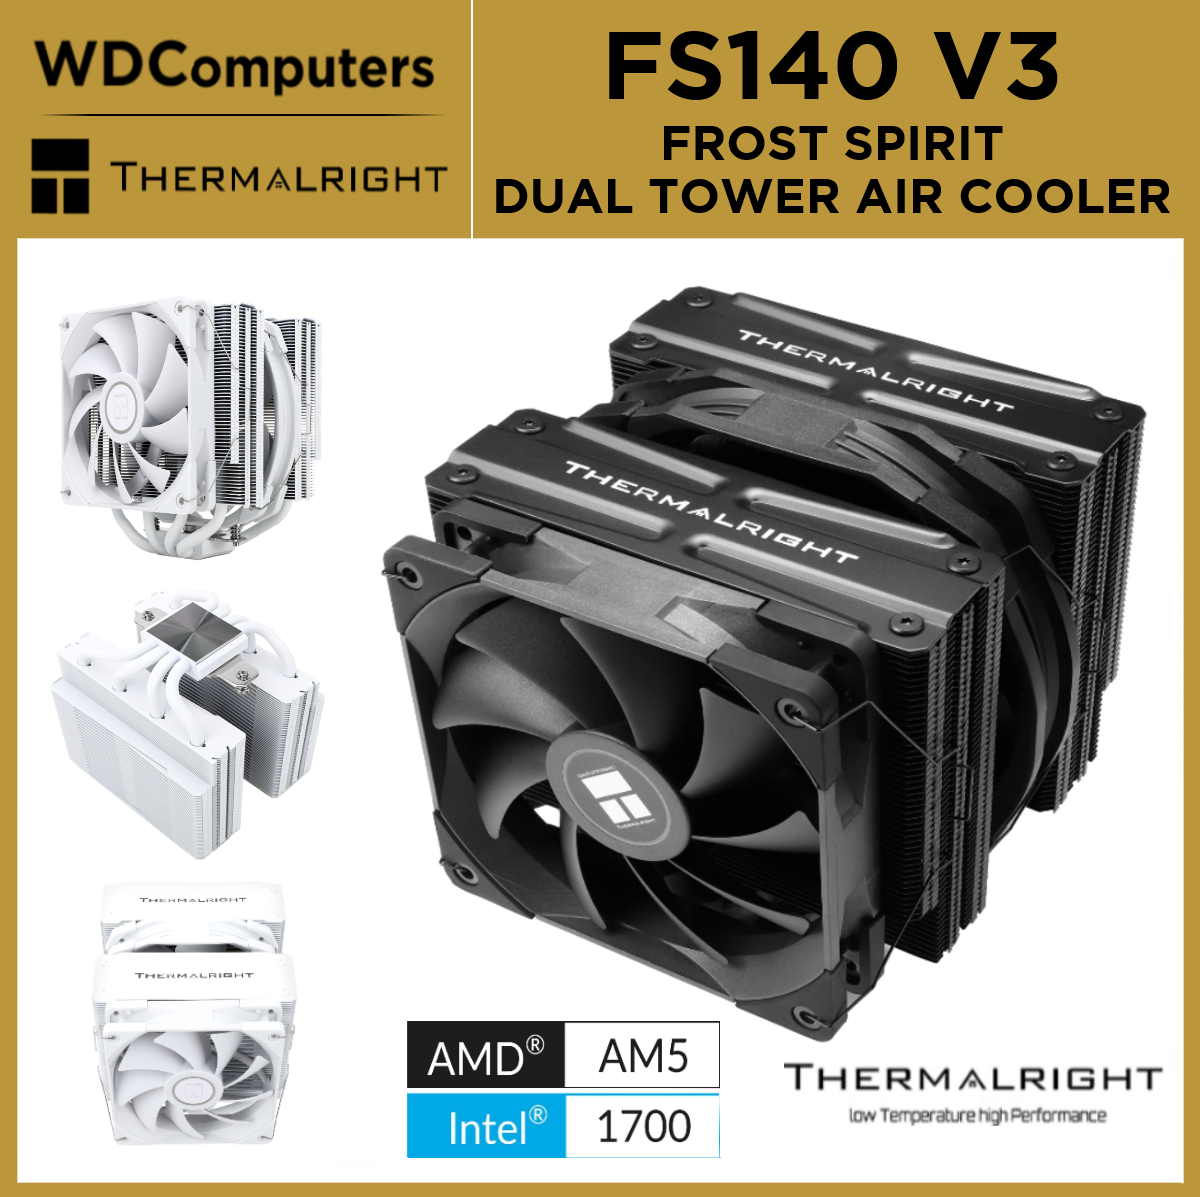 Thermalright Assassin Spirit 120 V2 CPU Cooler 4 Heat Pipes with AGHP  Technology, 120mm PWM Fan CPU Air Cooler,154mm High, for AMD AM4 AM5/Intel